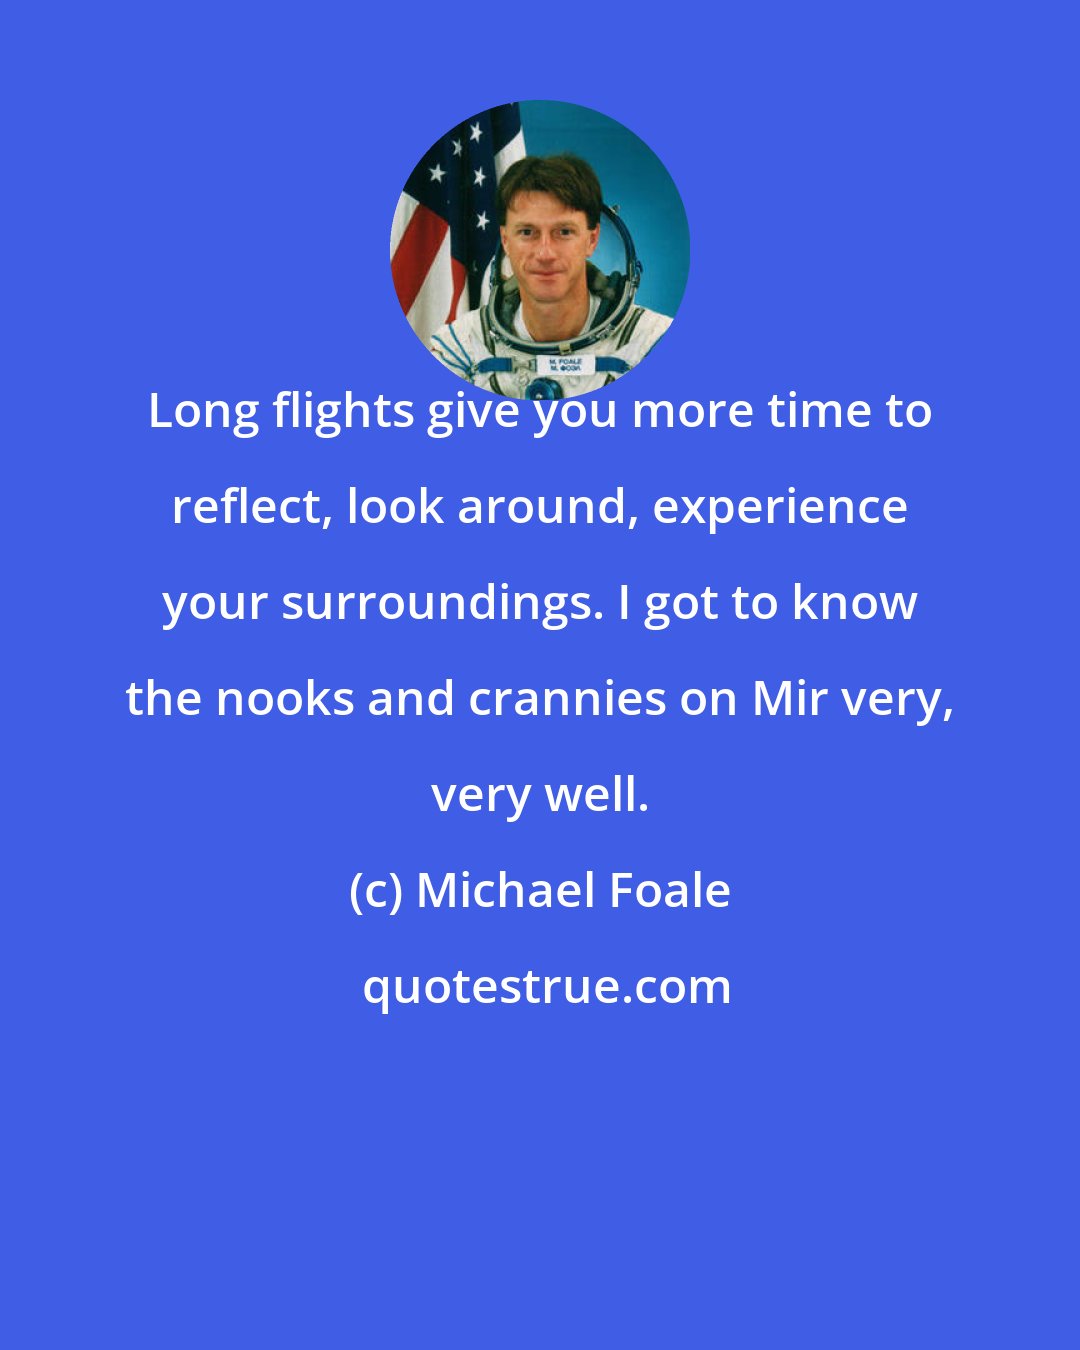 Michael Foale: Long flights give you more time to reflect, look around, experience your surroundings. I got to know the nooks and crannies on Mir very, very well.